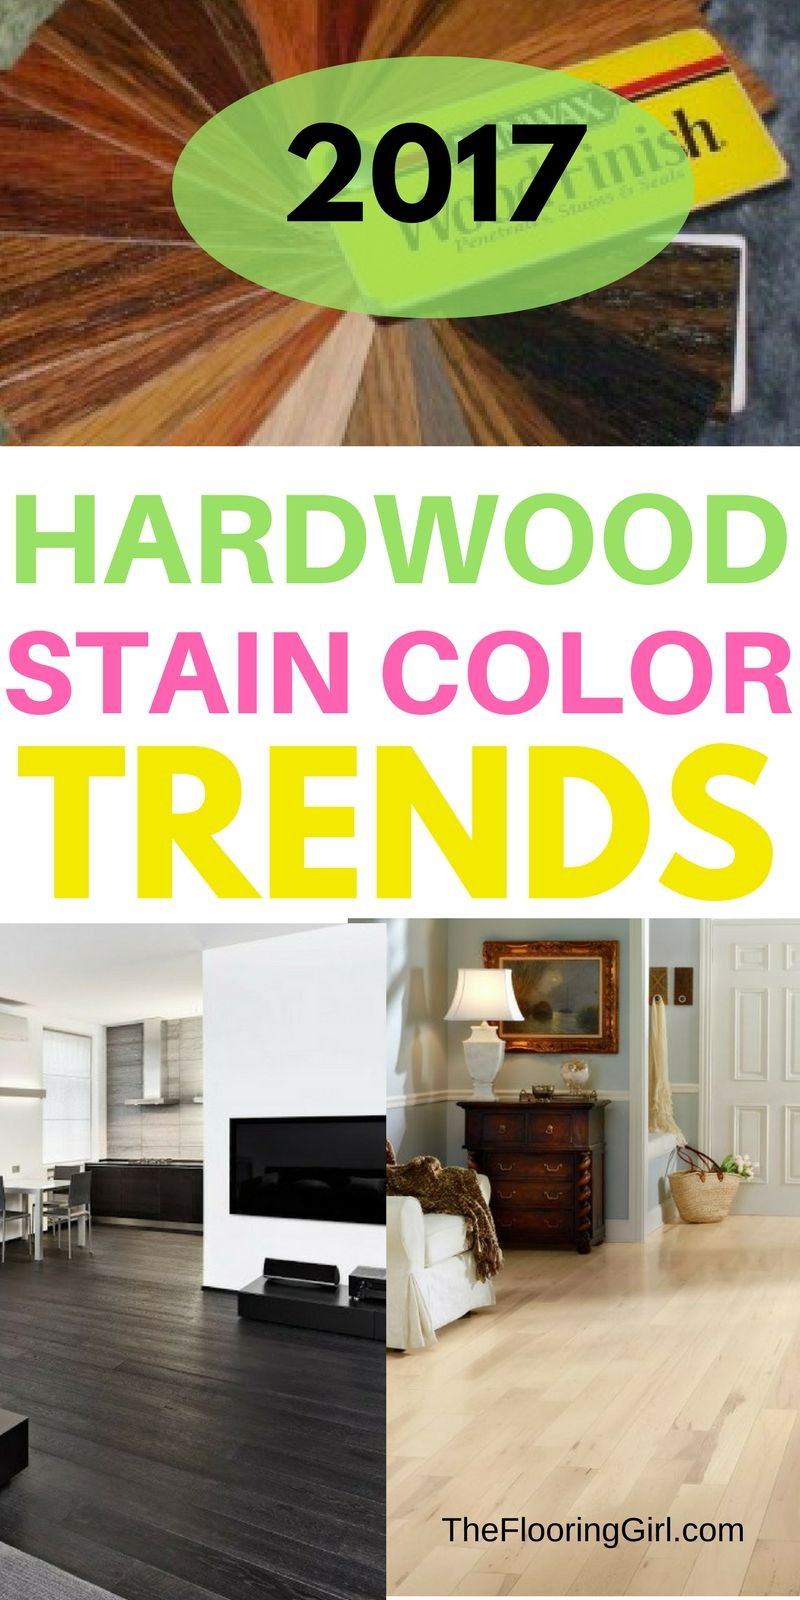 28 attractive Hardwood Floors and Water 2024 free download hardwood floors and water of hardwood flooring stain color trends 2018 more from the flooring with hardwood flooring stain color trends for 2017 hardwood colors that are in style theflooring